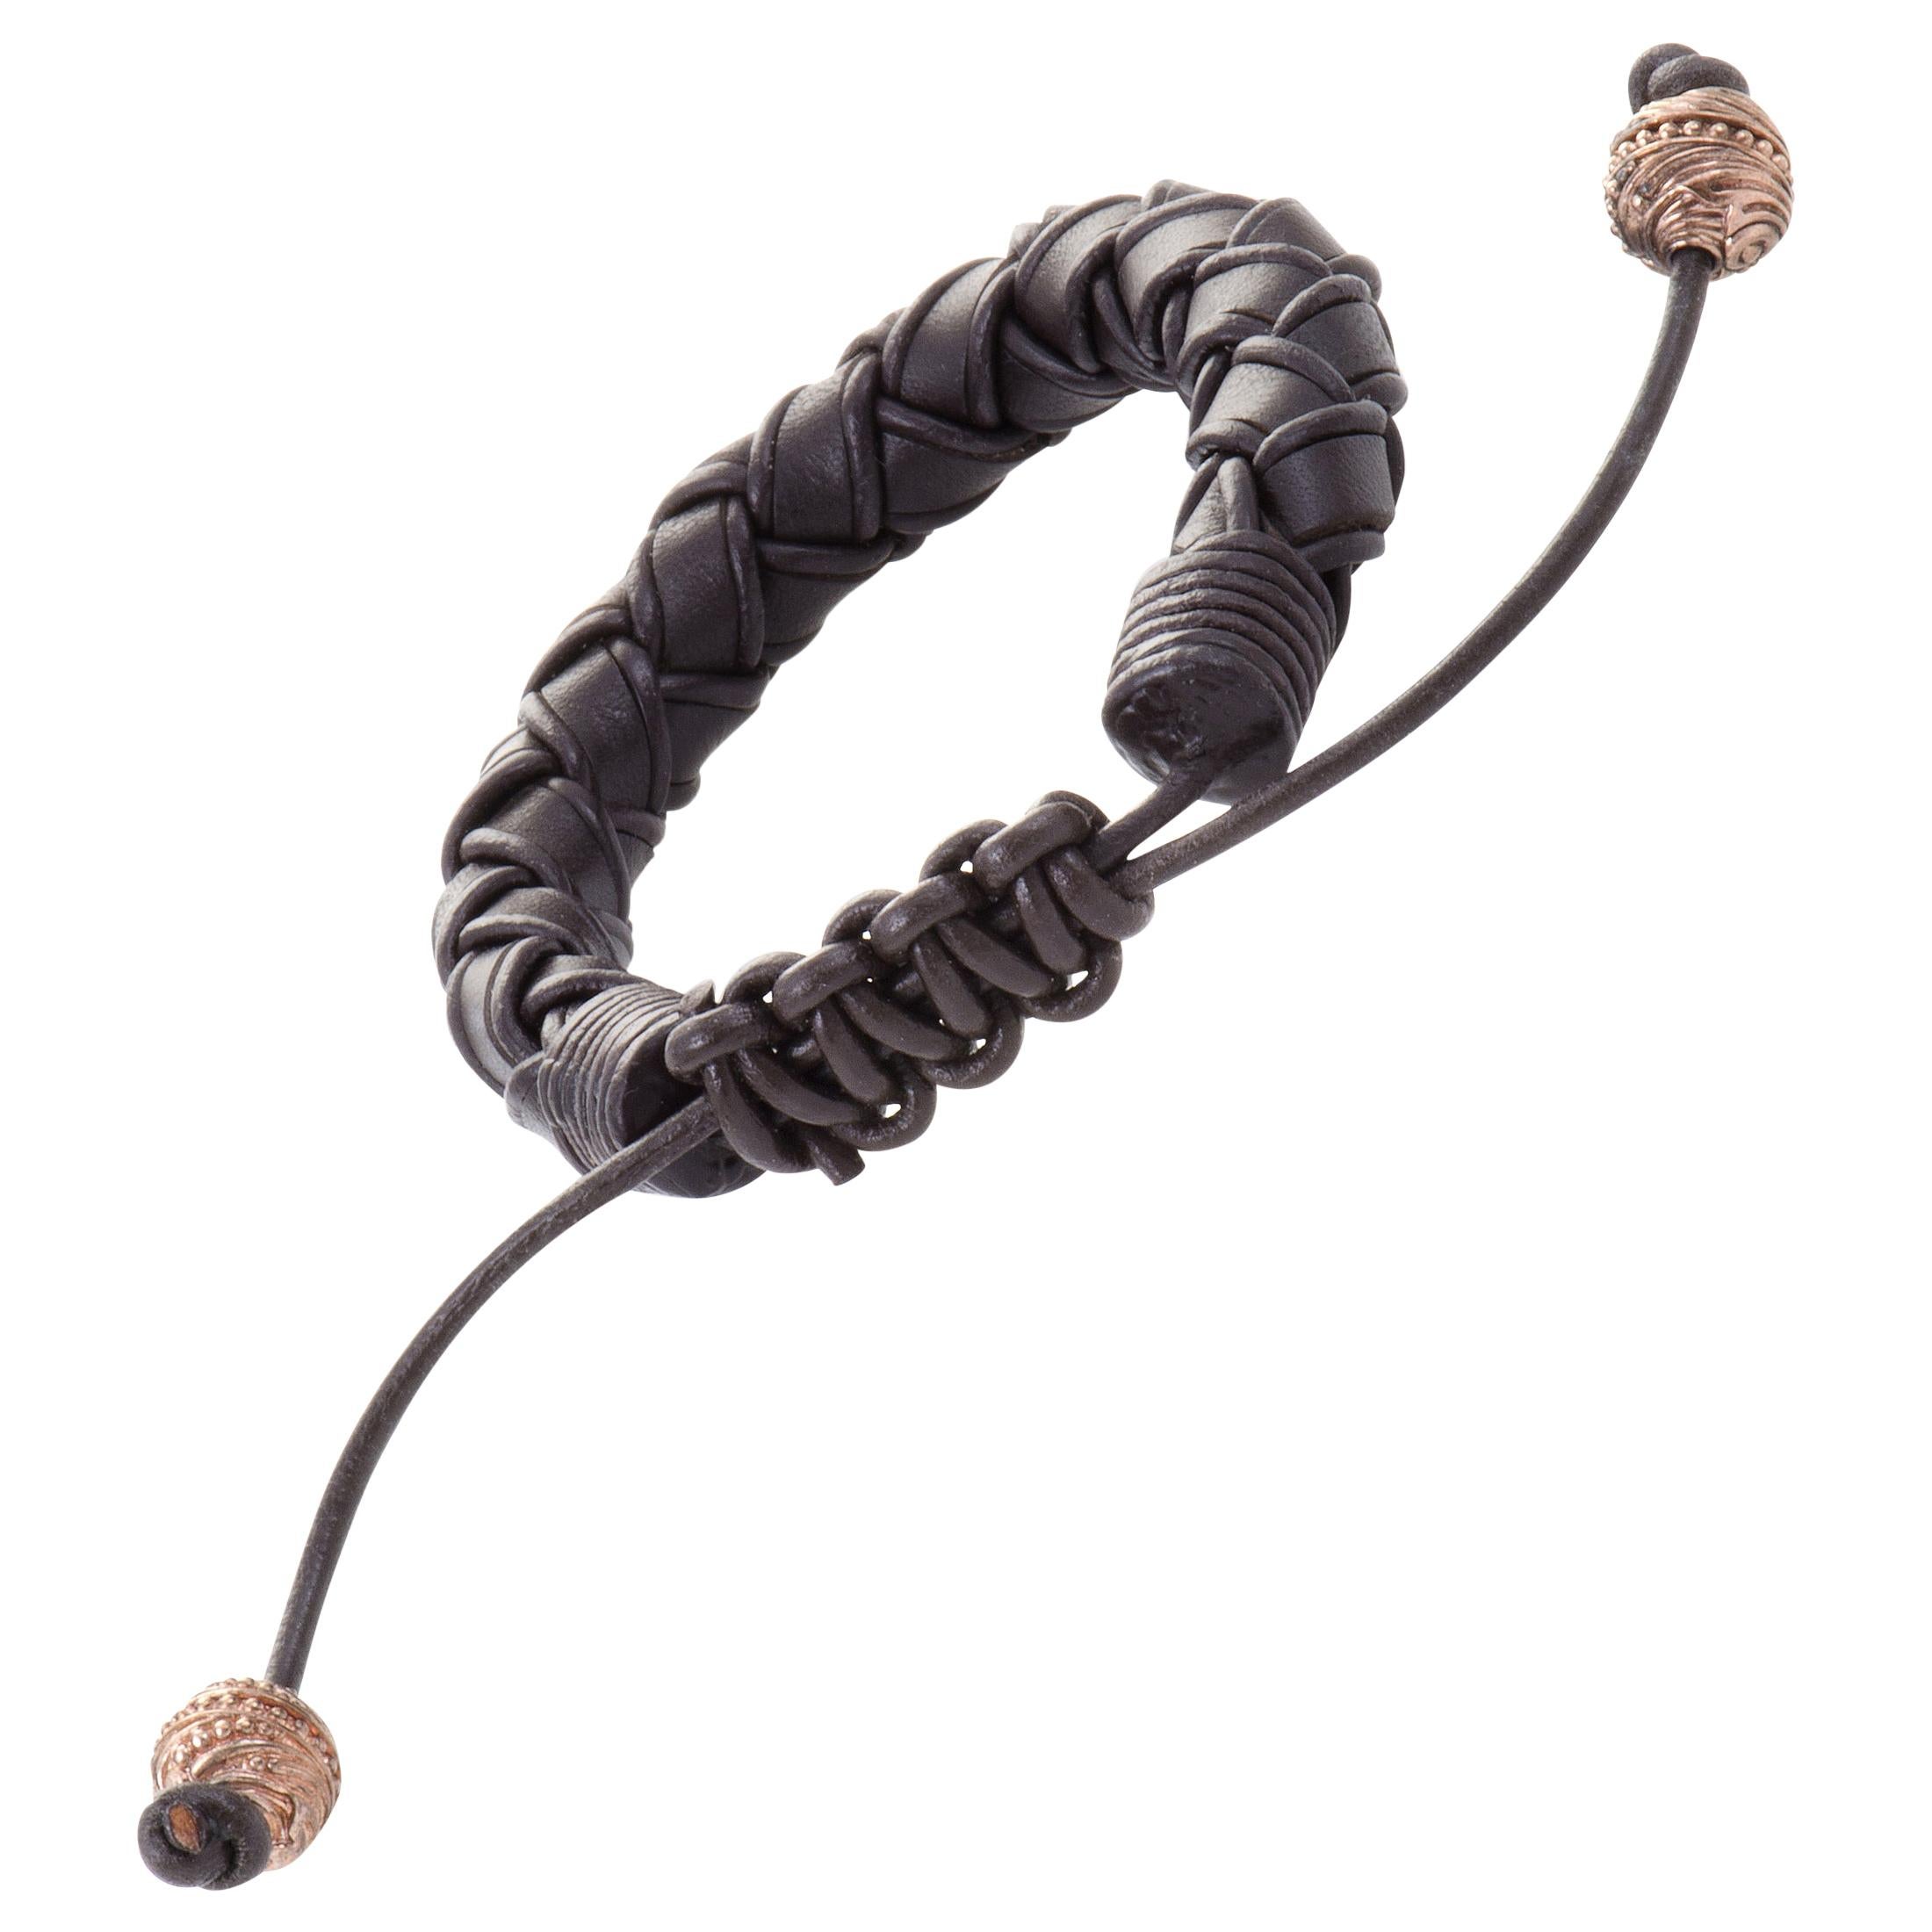 Stephen Webster No Regrets Woven Leather and Rose Gold Tone Silver Bracelet